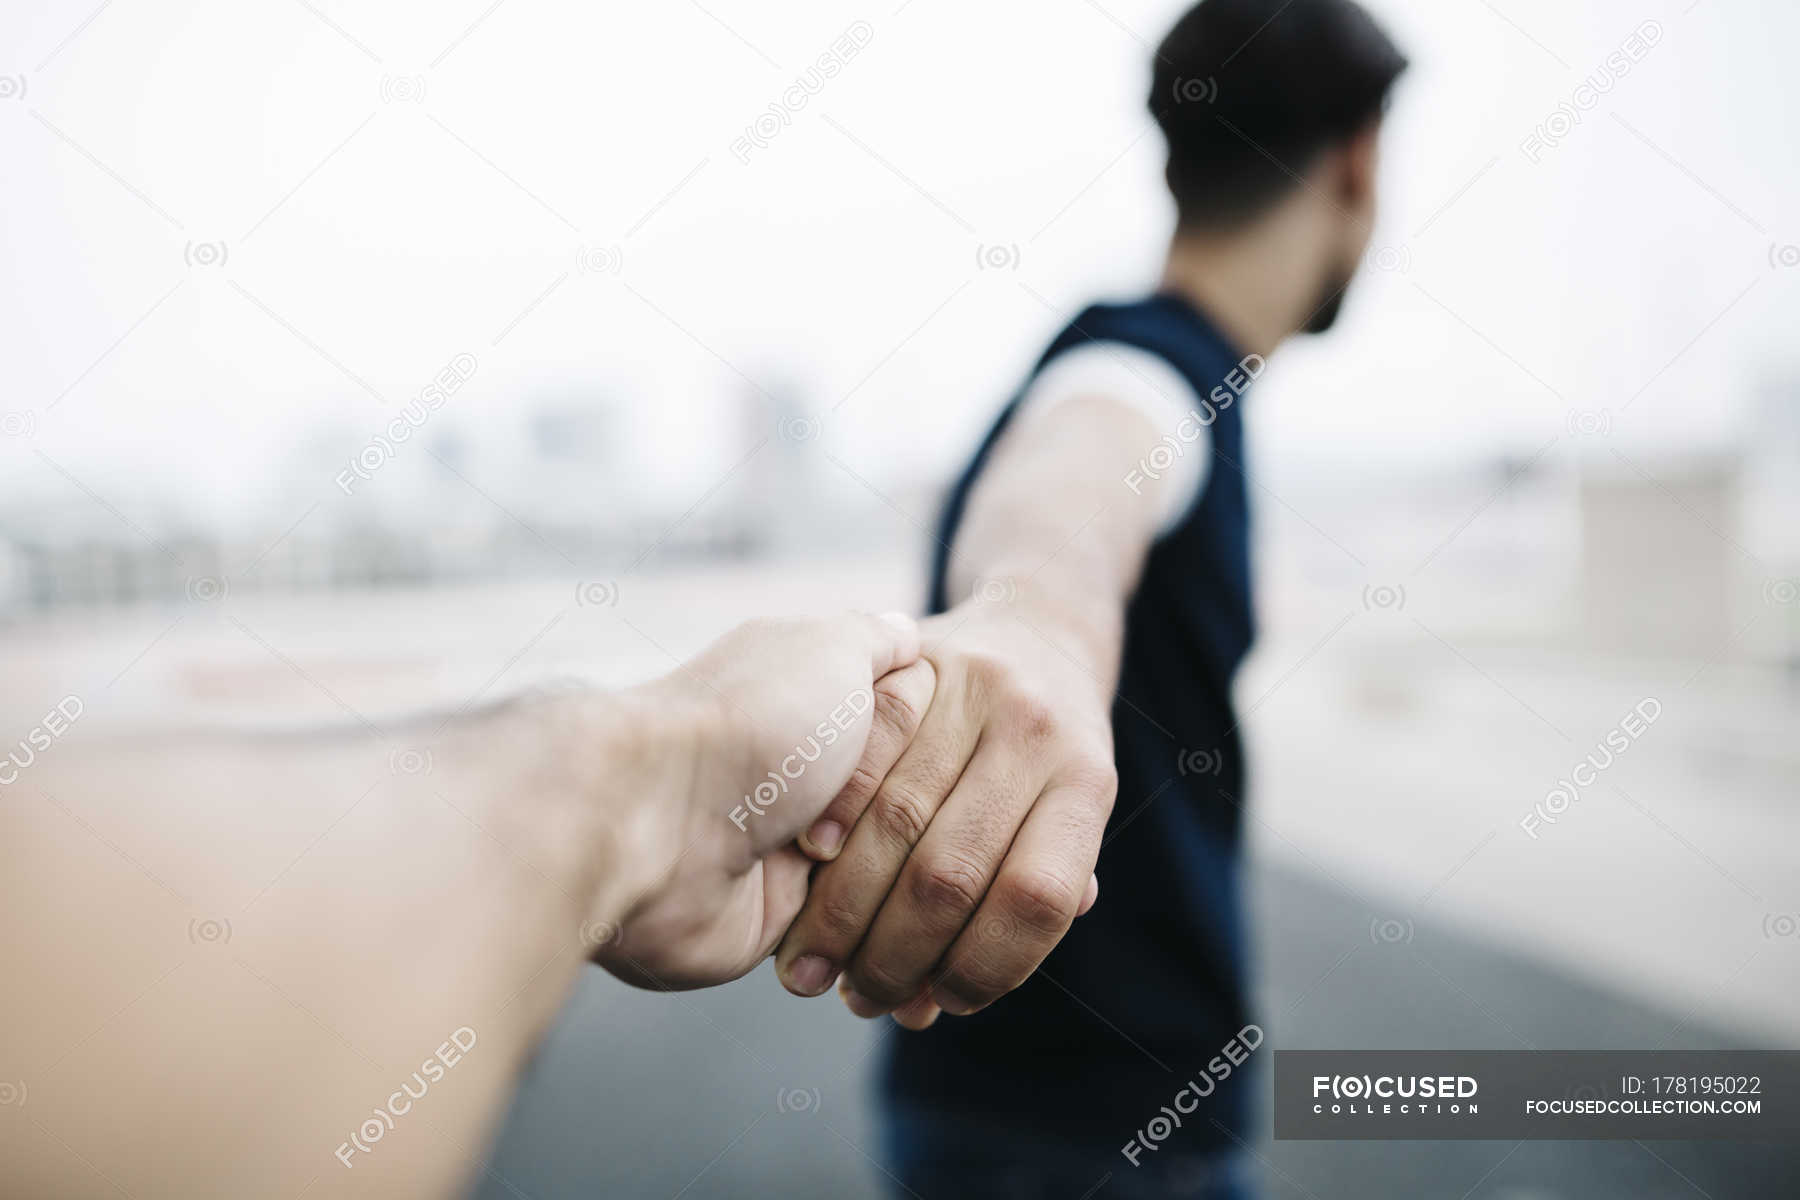 holding hands photography